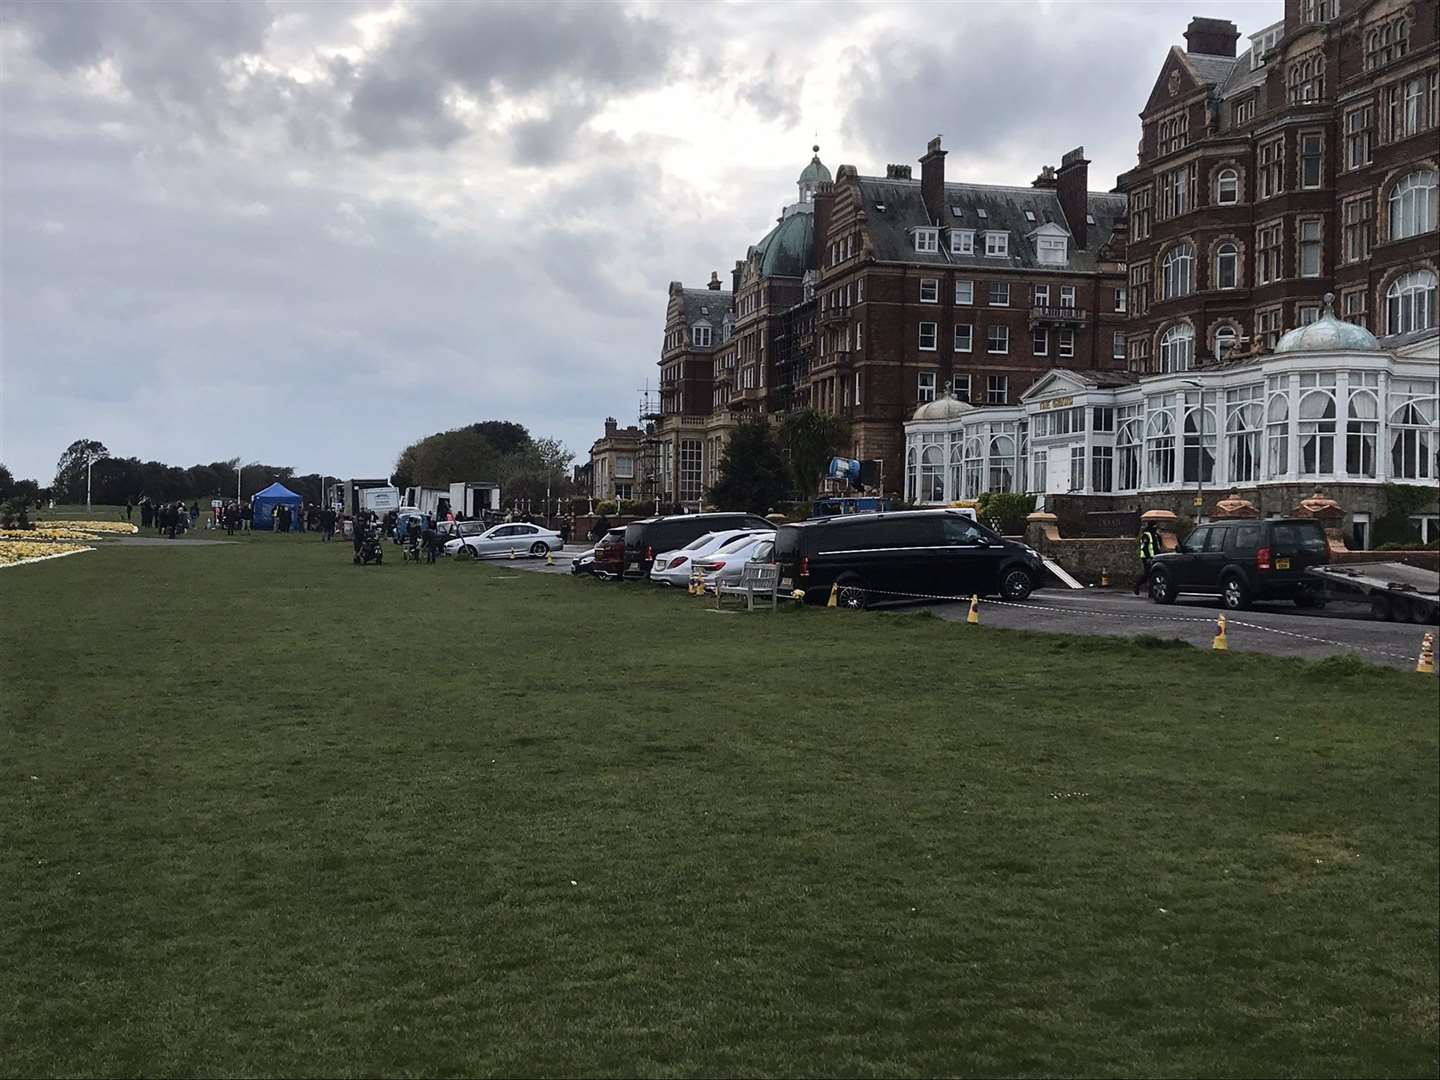 Filming is taking place near The Grand. Photo: Ian Everley